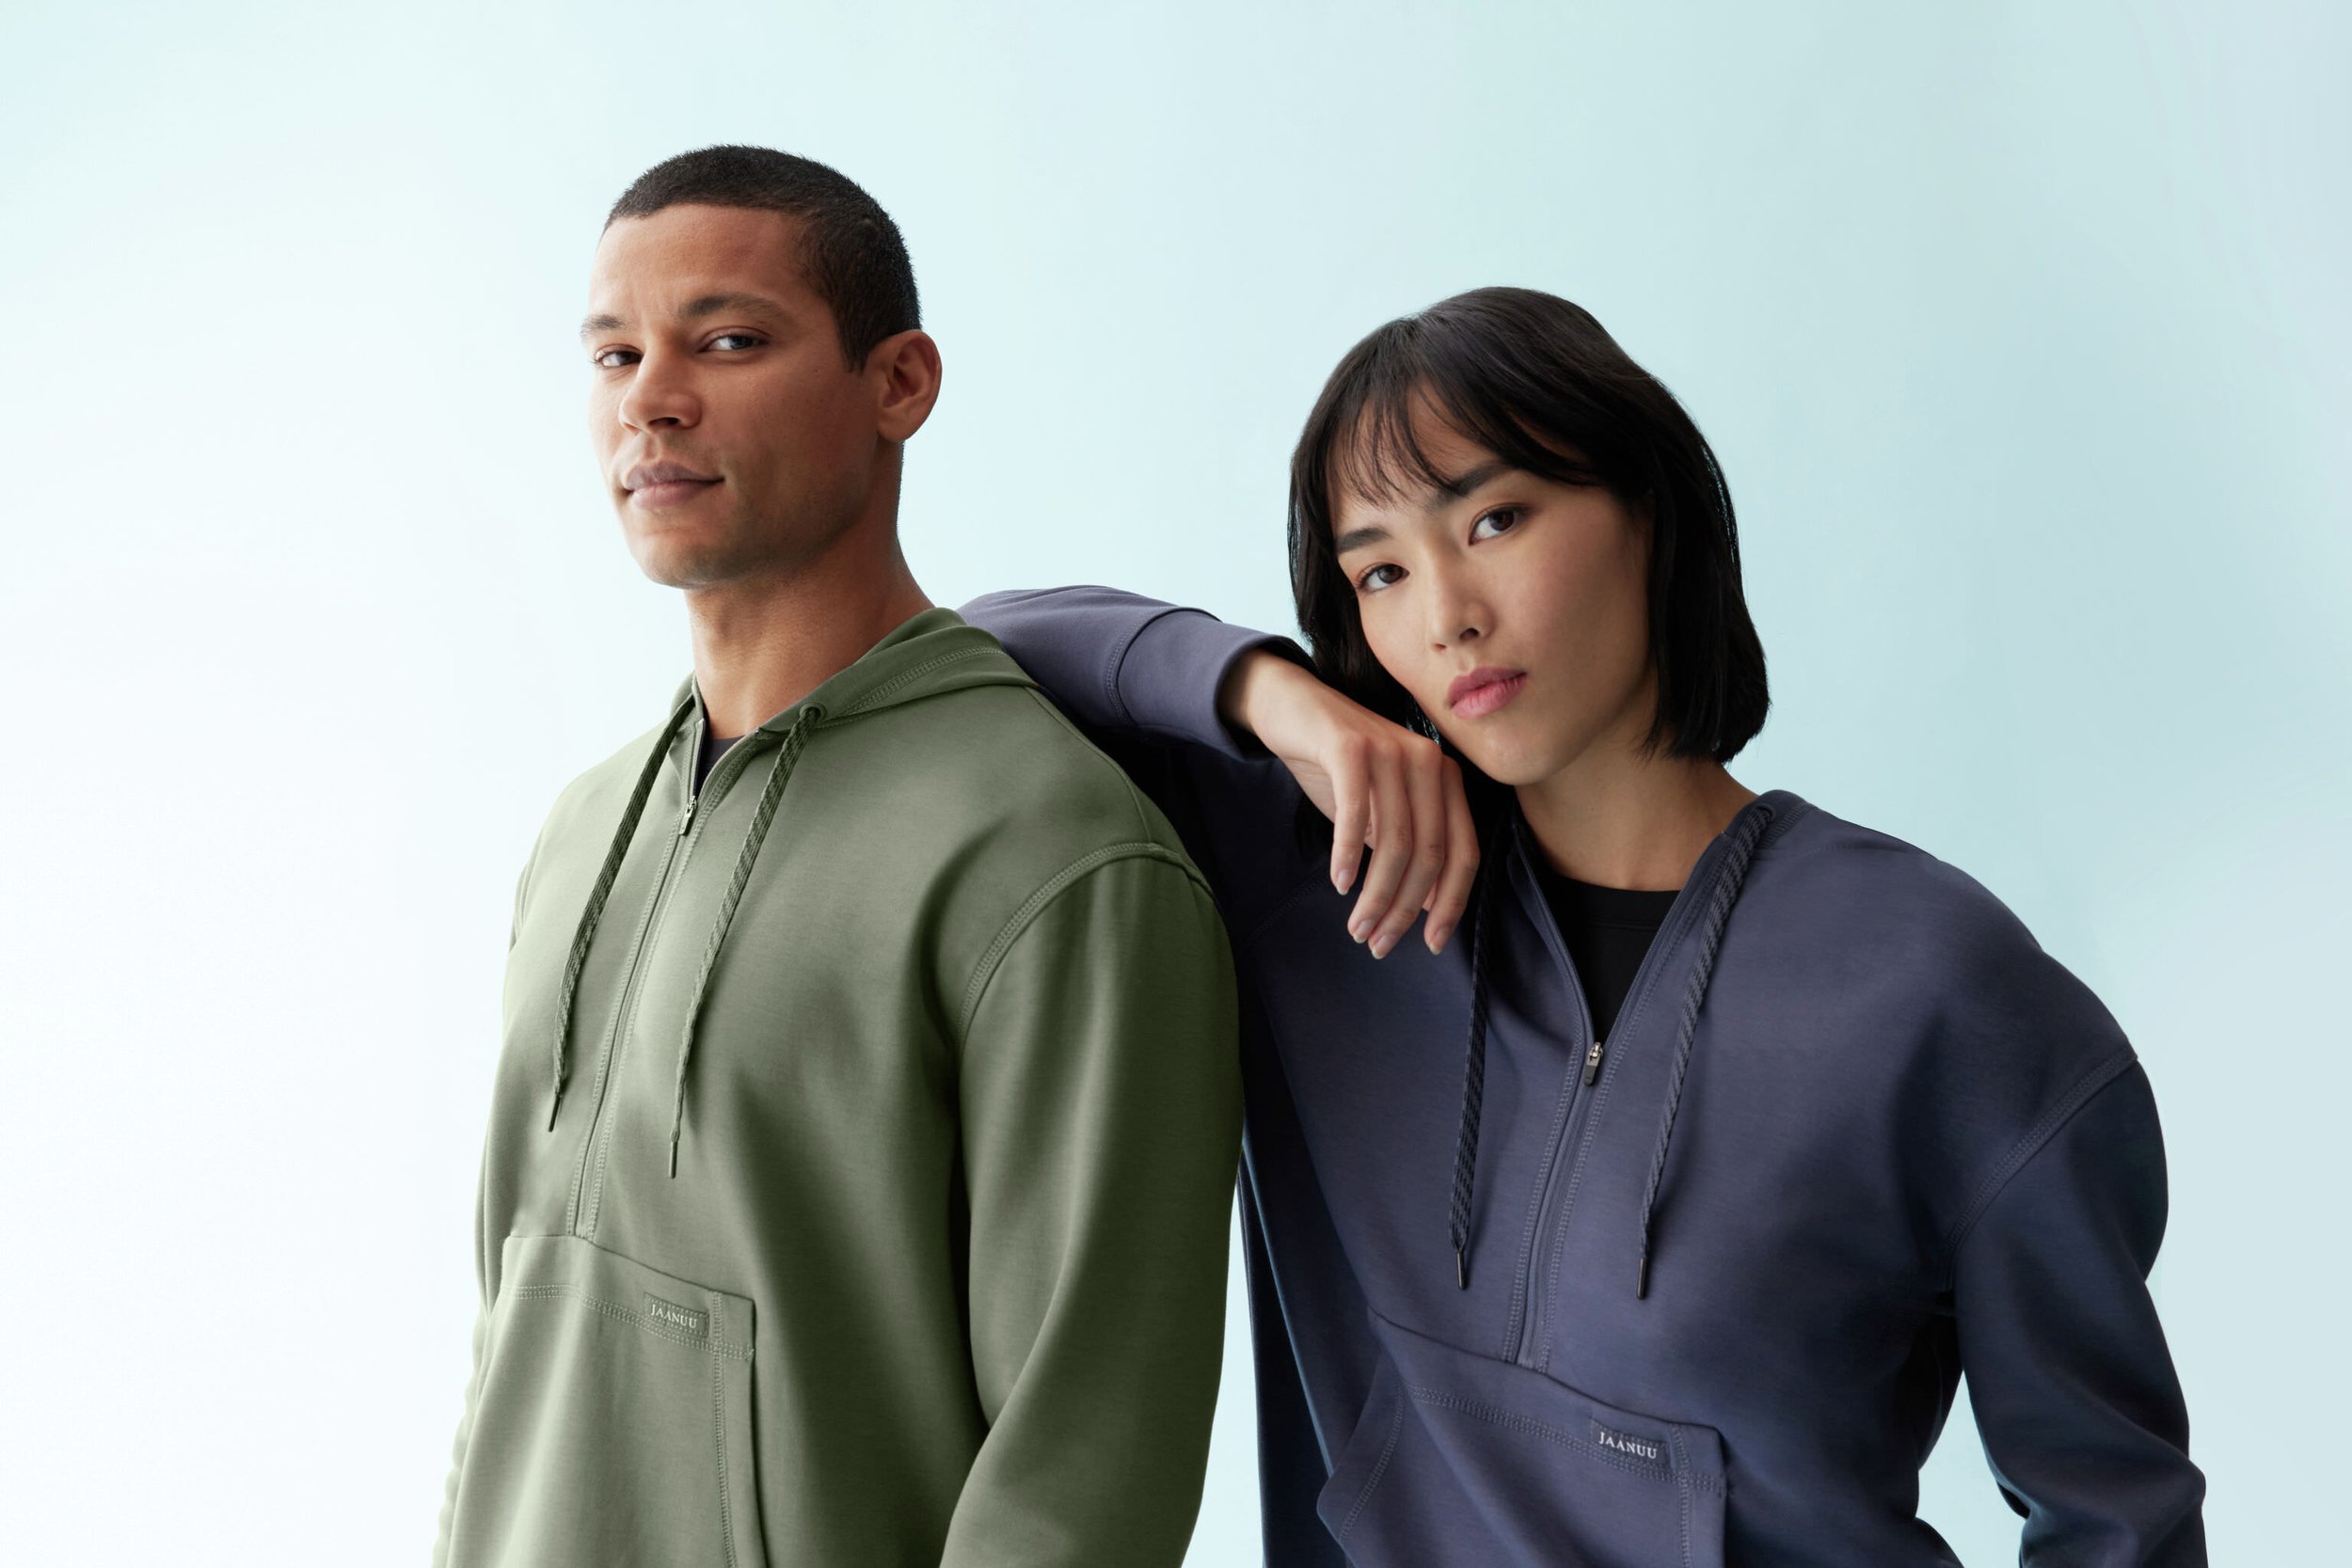 03_GROUP_UNI_1_2_ZIP_HOODIE_W_JOGGER_ M_JOGGER_GRAY_OLIVE_1481_preview.jpg